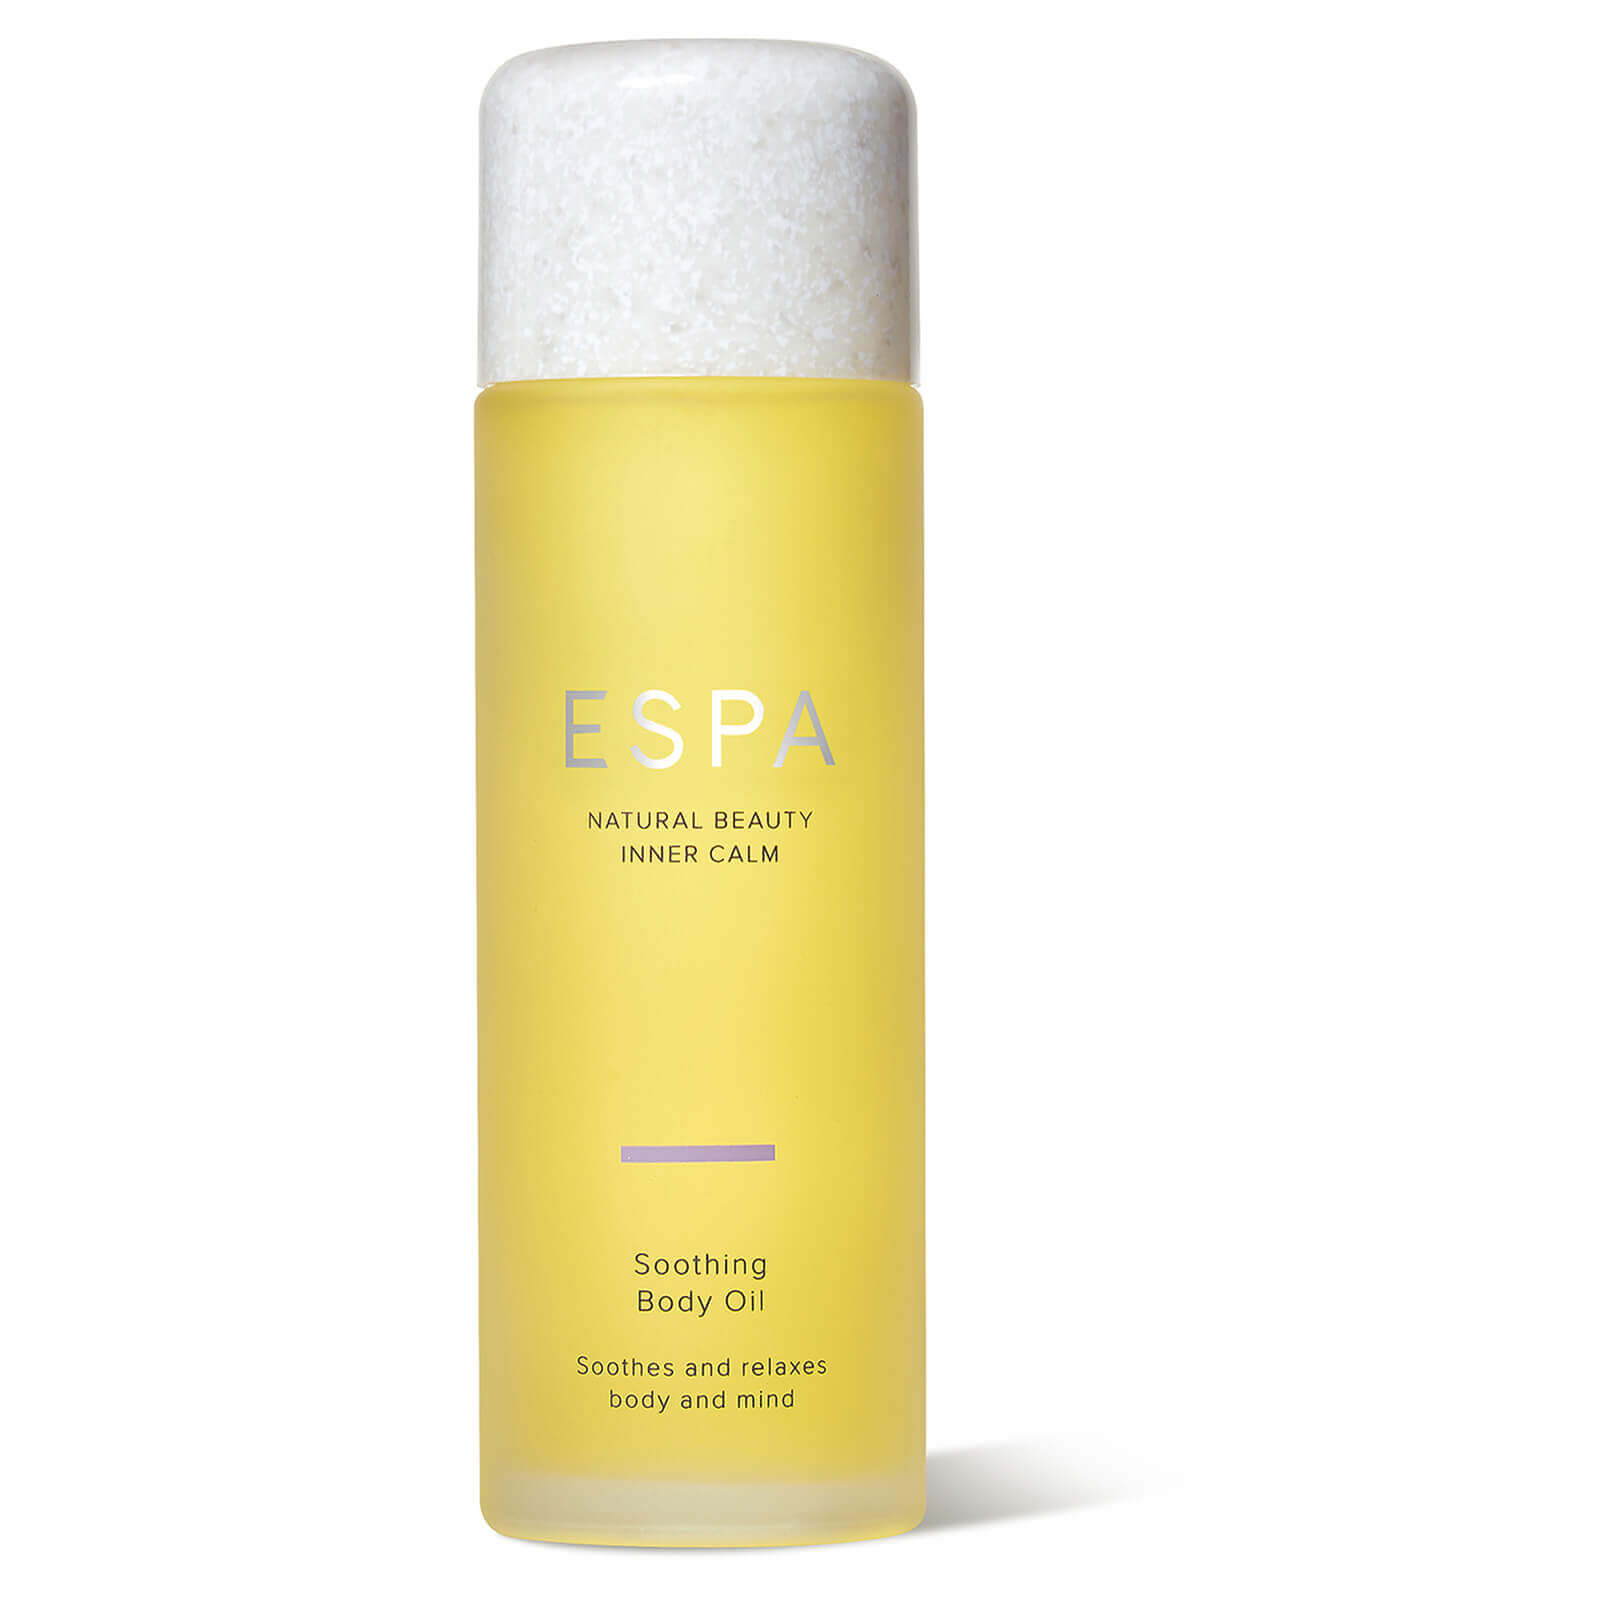 Huile pour le Corps Apaisante Soothing Body Oil ESPA 100 ml